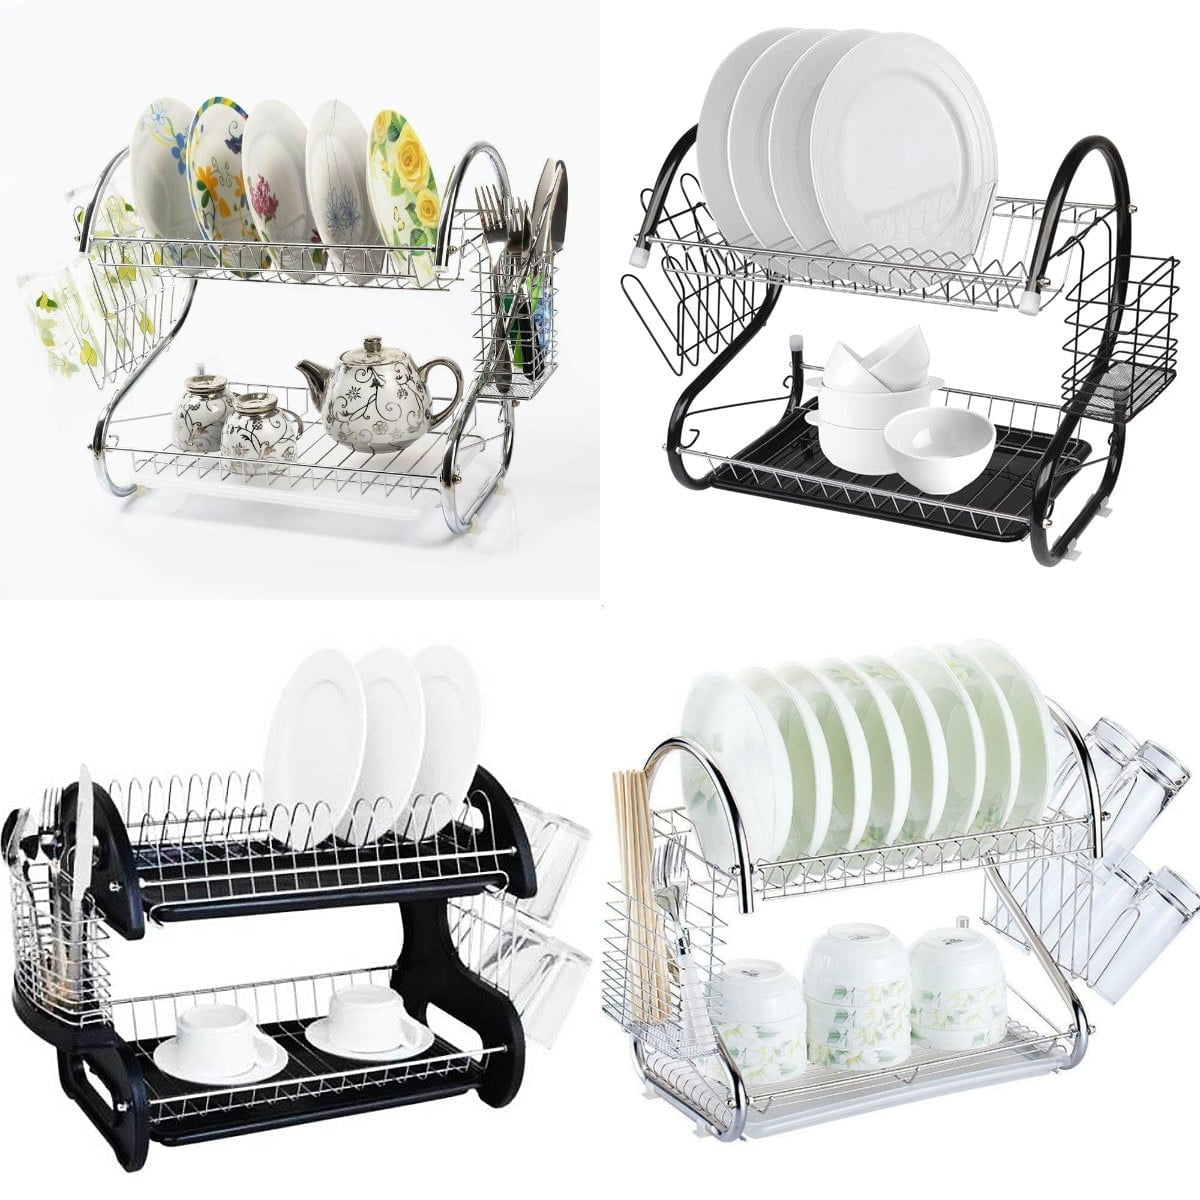 Z&L HOUSE 2-Tier Dish Drying Rack, Space Saving Metals Dish Dryer Rack with  Drainboard, Small Dish Racks for Kitchen Counter with Cup Holder Utensil